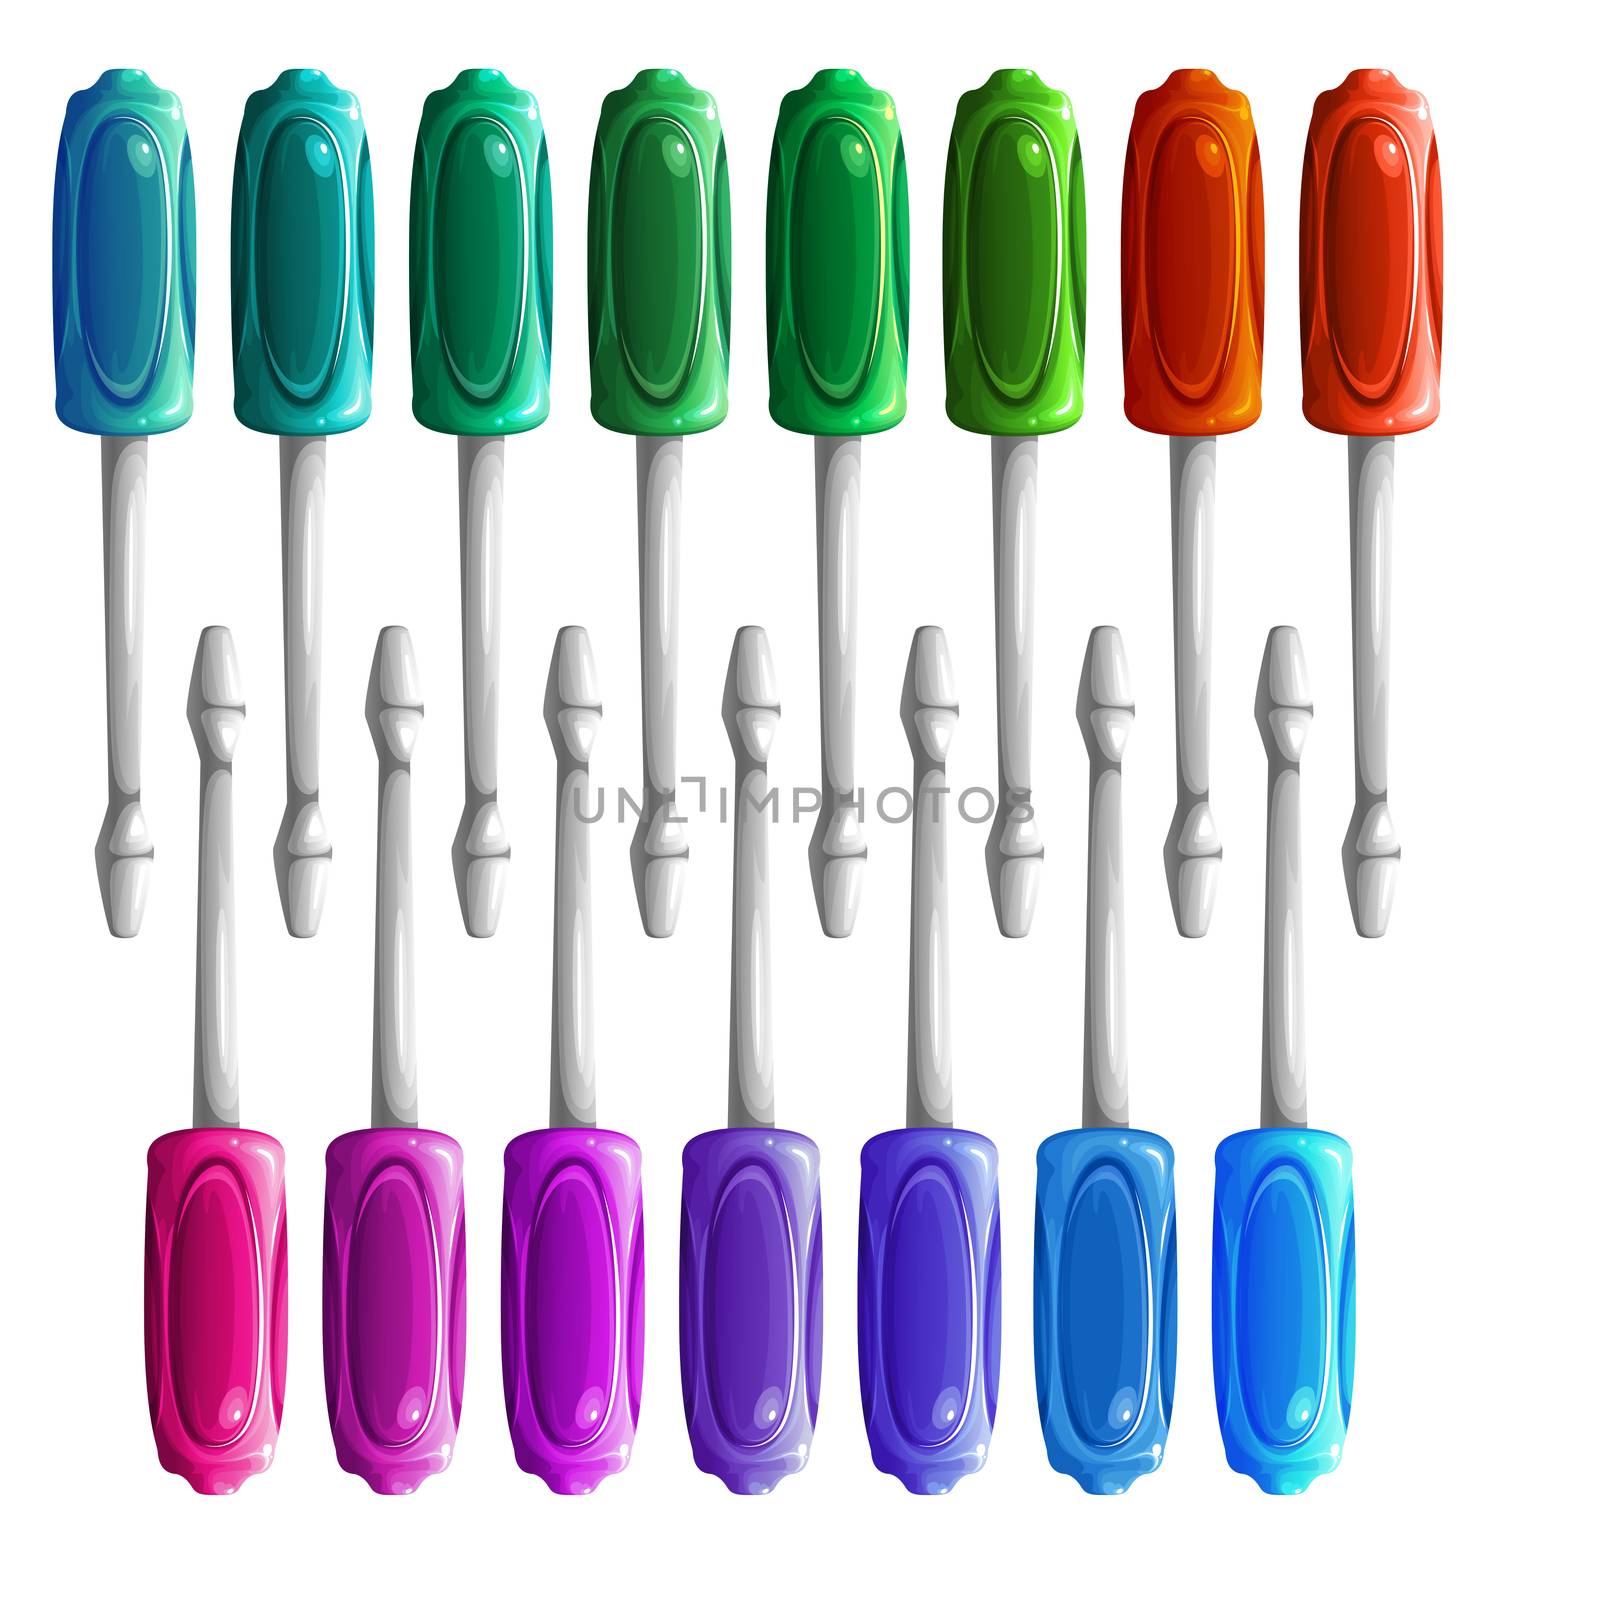 The most beautiful set of screwdrivers of multiple colors very pleasant to be used in various subjects